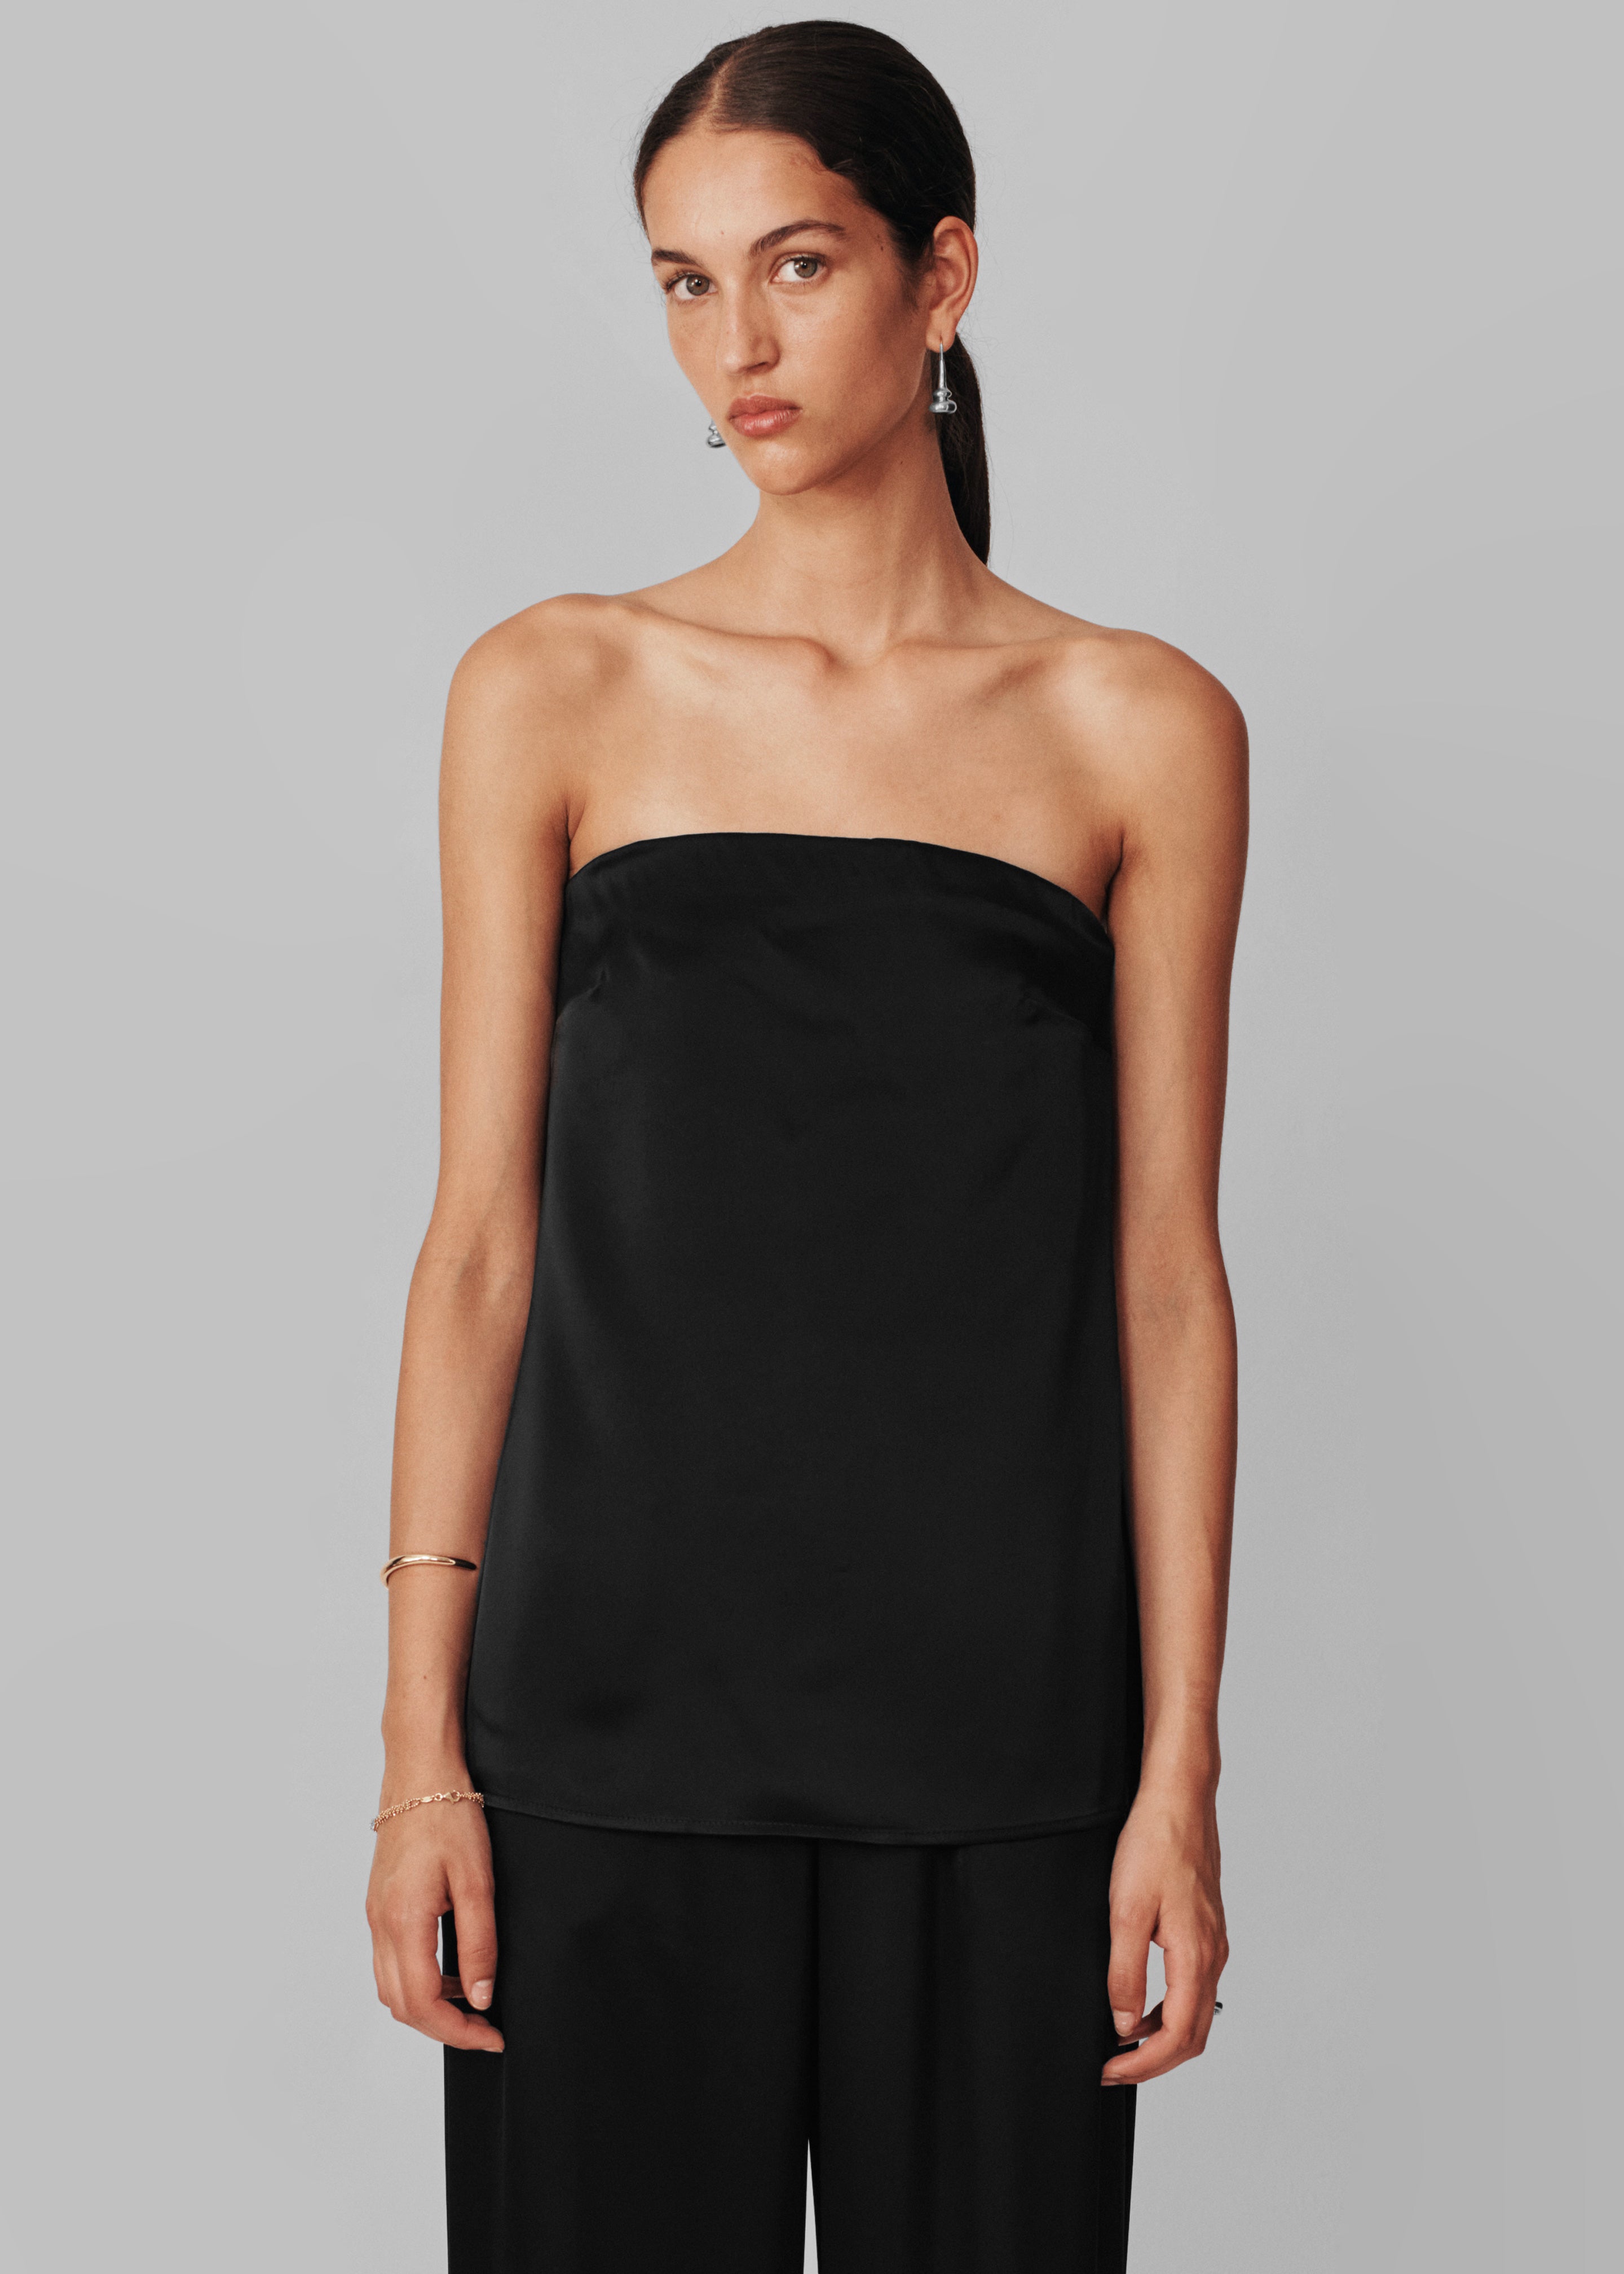 Black Strapless Camisole by Esse Studios on Sale